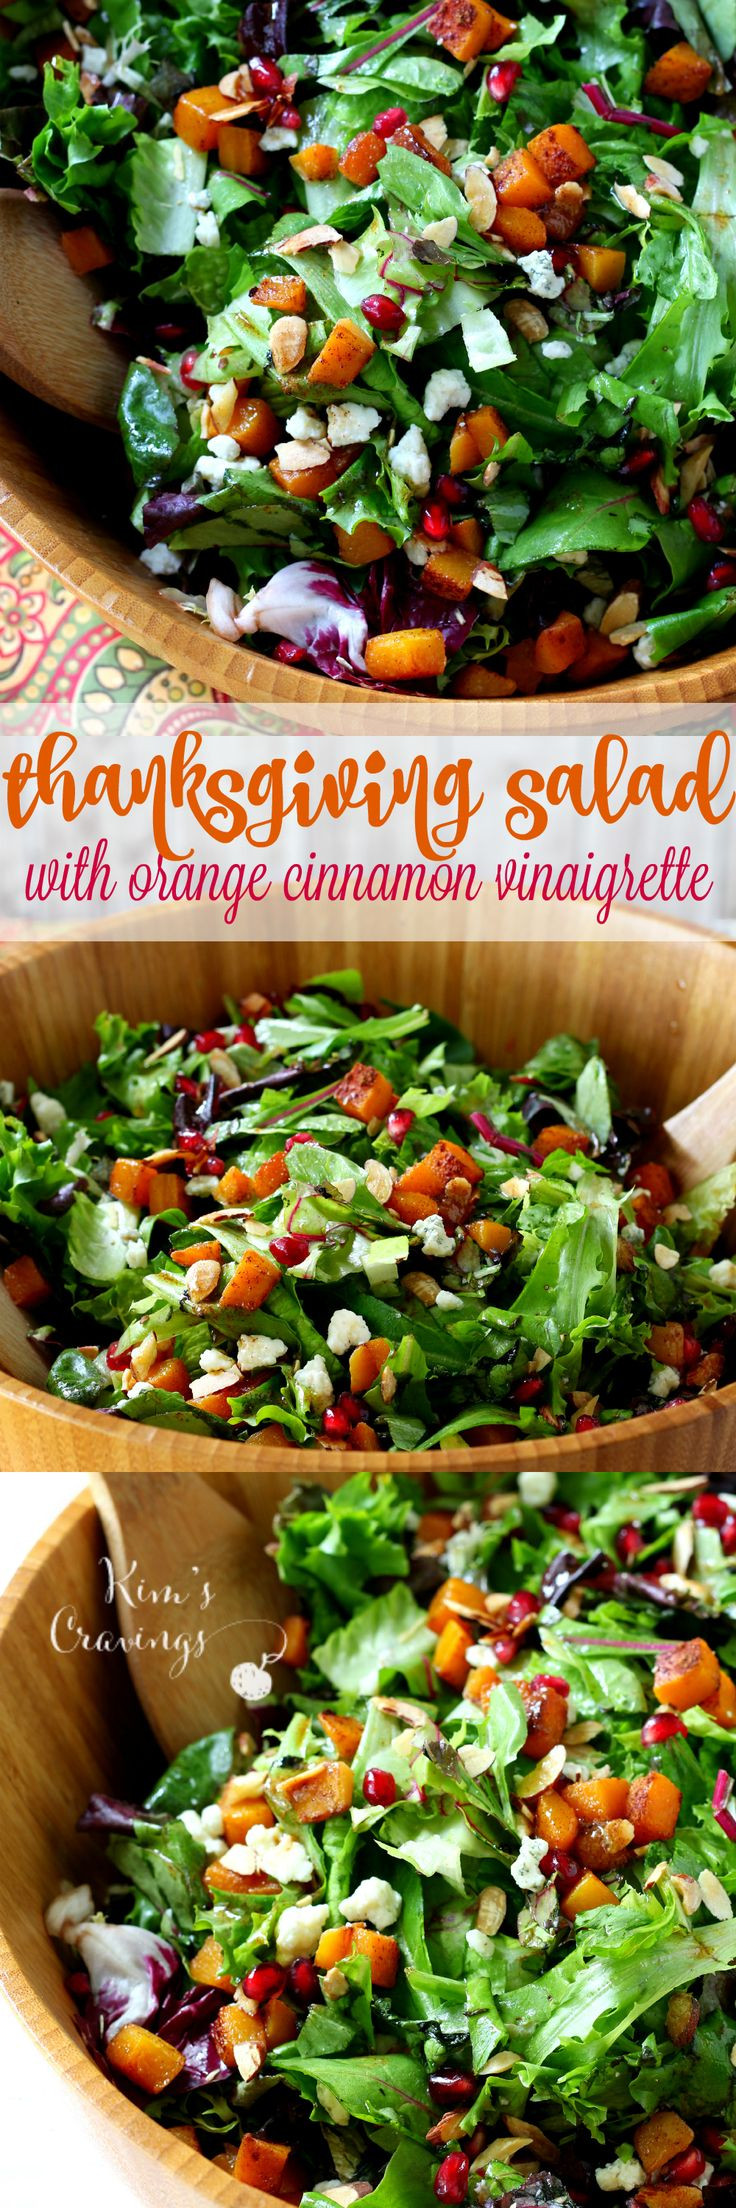 Easy Thanksgiving Salads
 17 Best ideas about Thanksgiving Salad on Pinterest